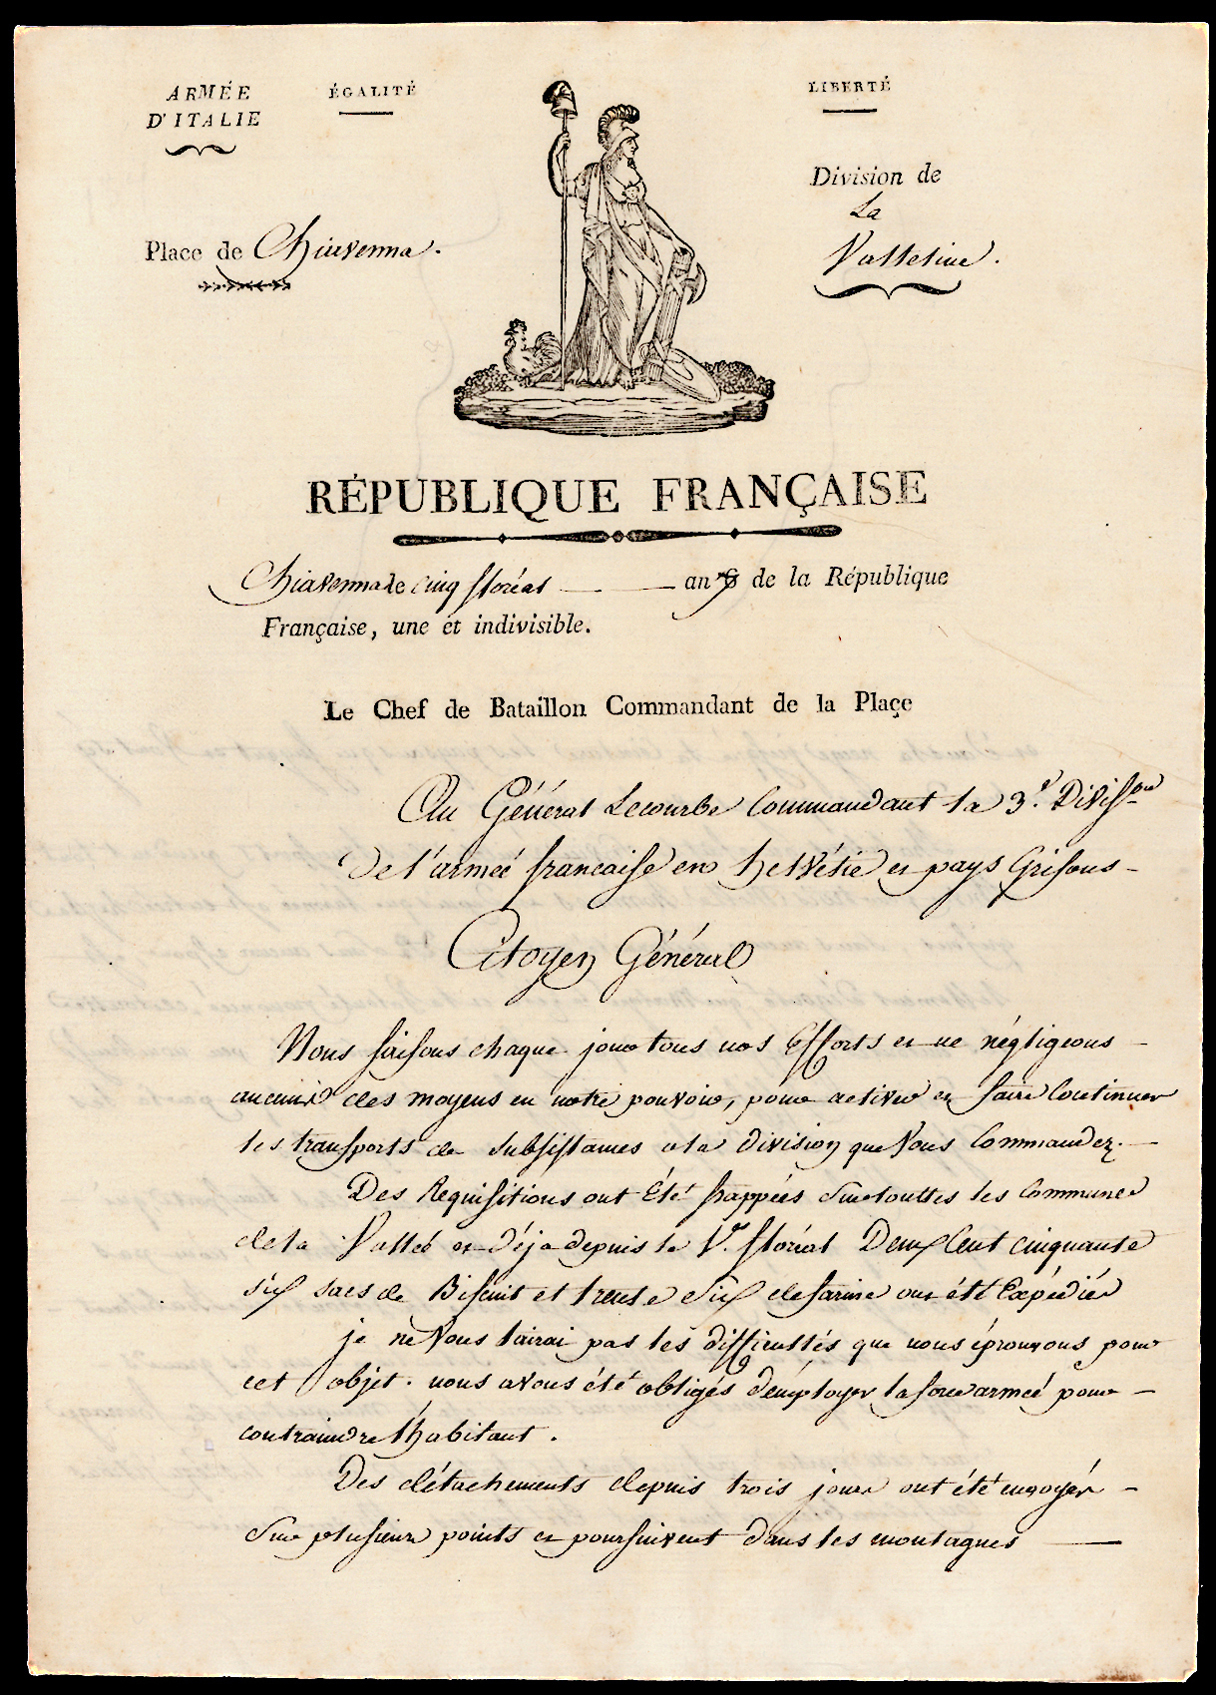 Referenz: lacombe-franz-bataillonschef-an-lecourbe-claude-jacques-franz-general